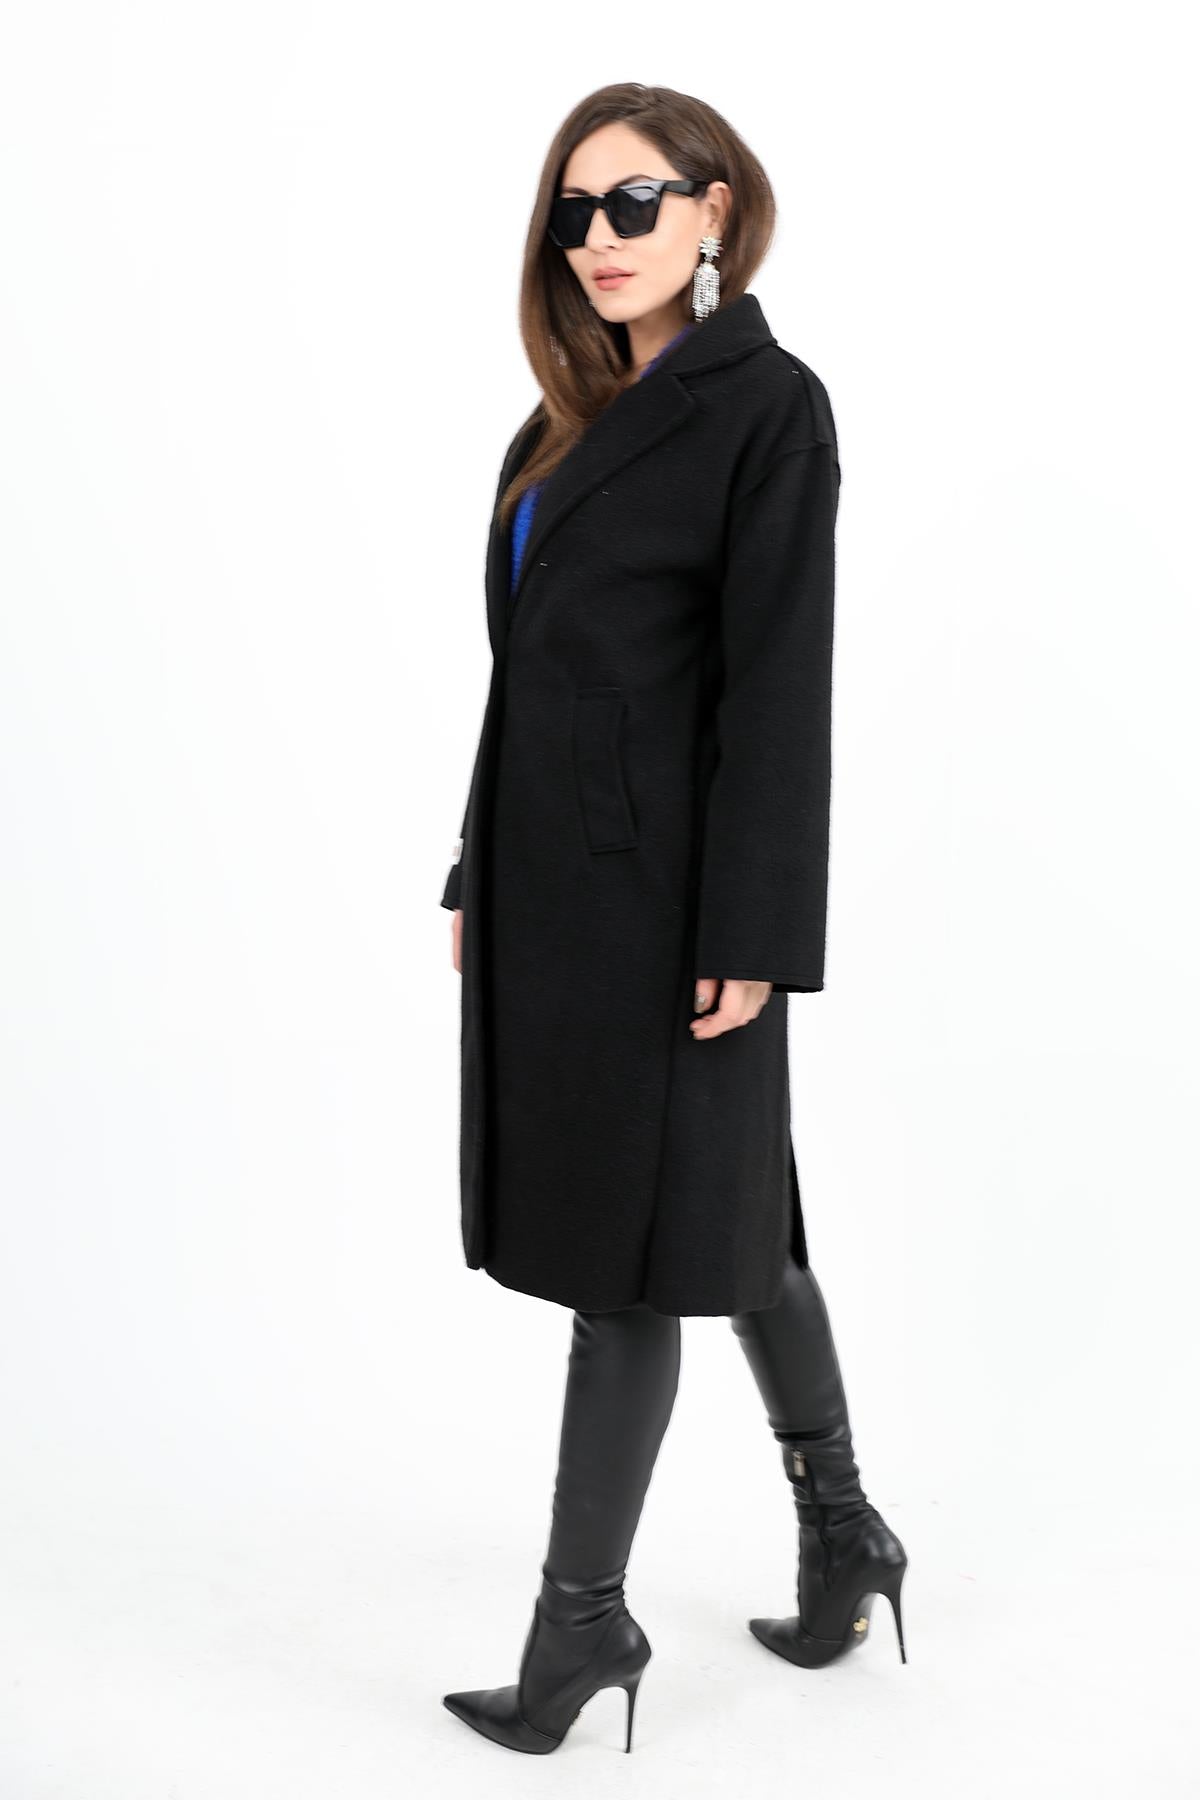 Women's Cashmere Coat Double-Breasted Collar Sleeve with Crest Detail - Black - STREETMODE™